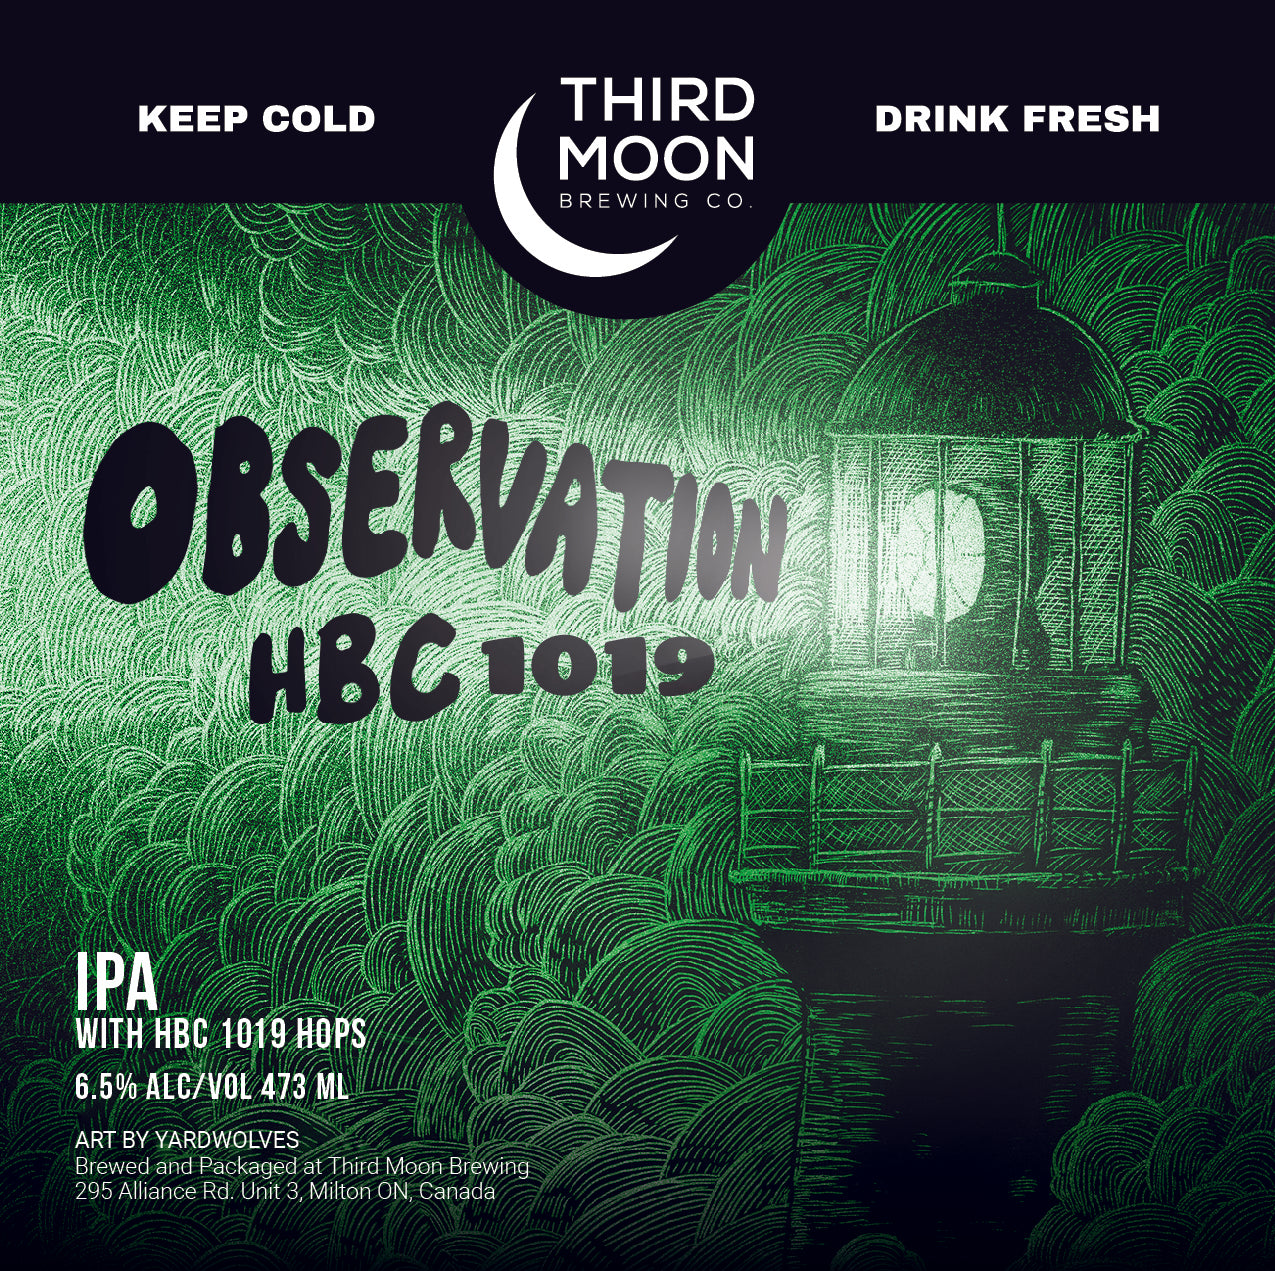 IPA - 4-pk of "Observation (HBC 1019)" tall cans